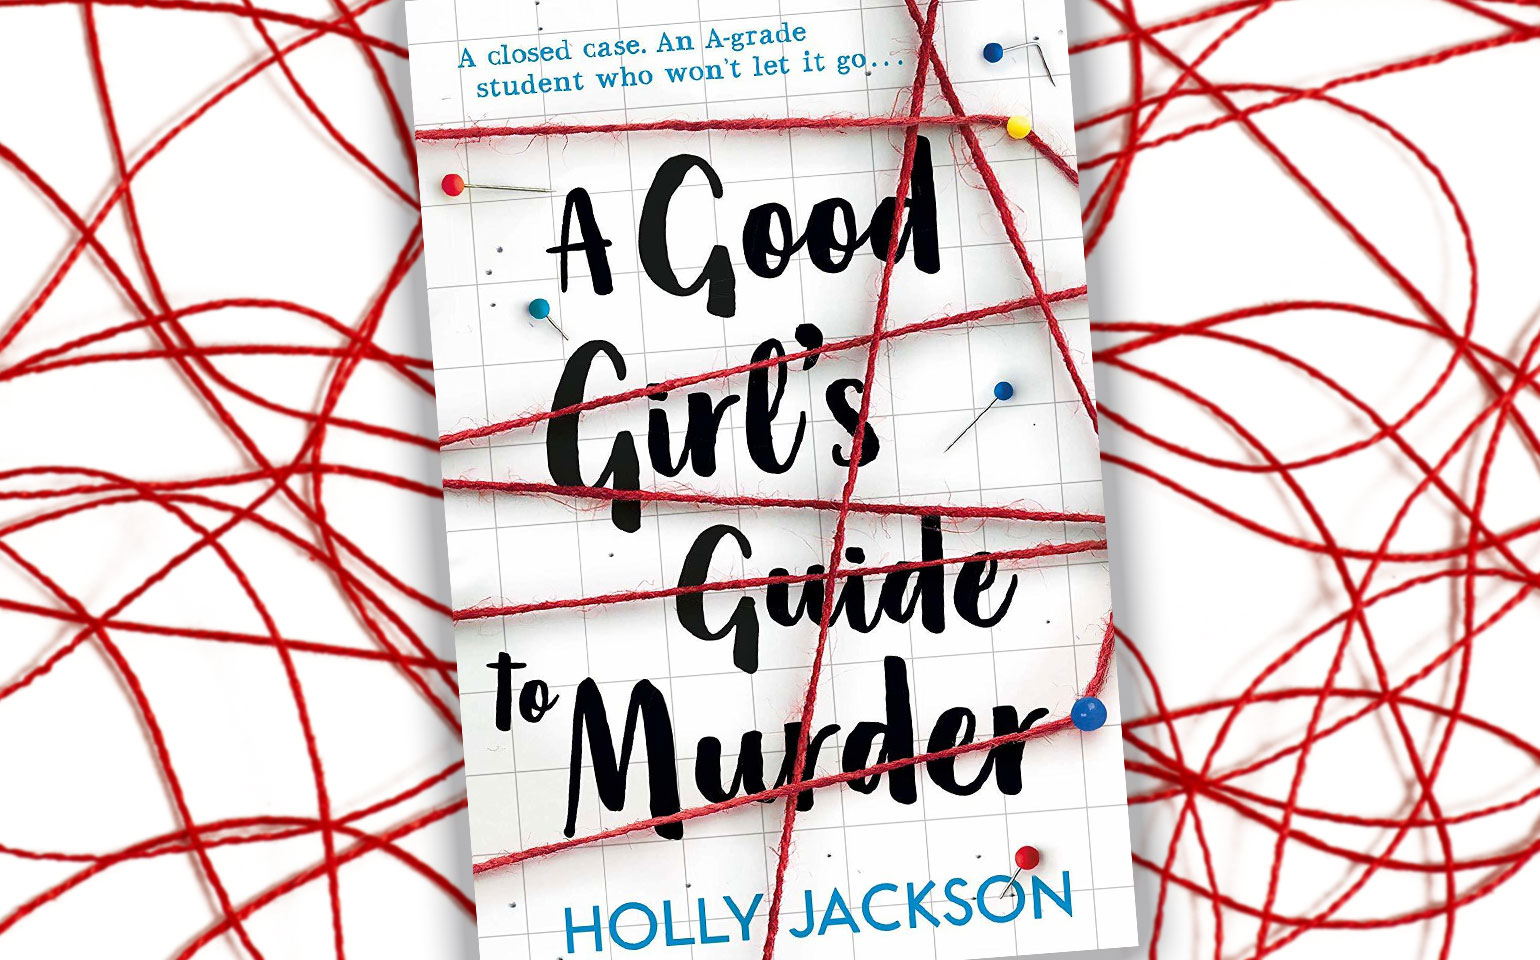 The cover of A Good Girl's Guide to Murder is shown.